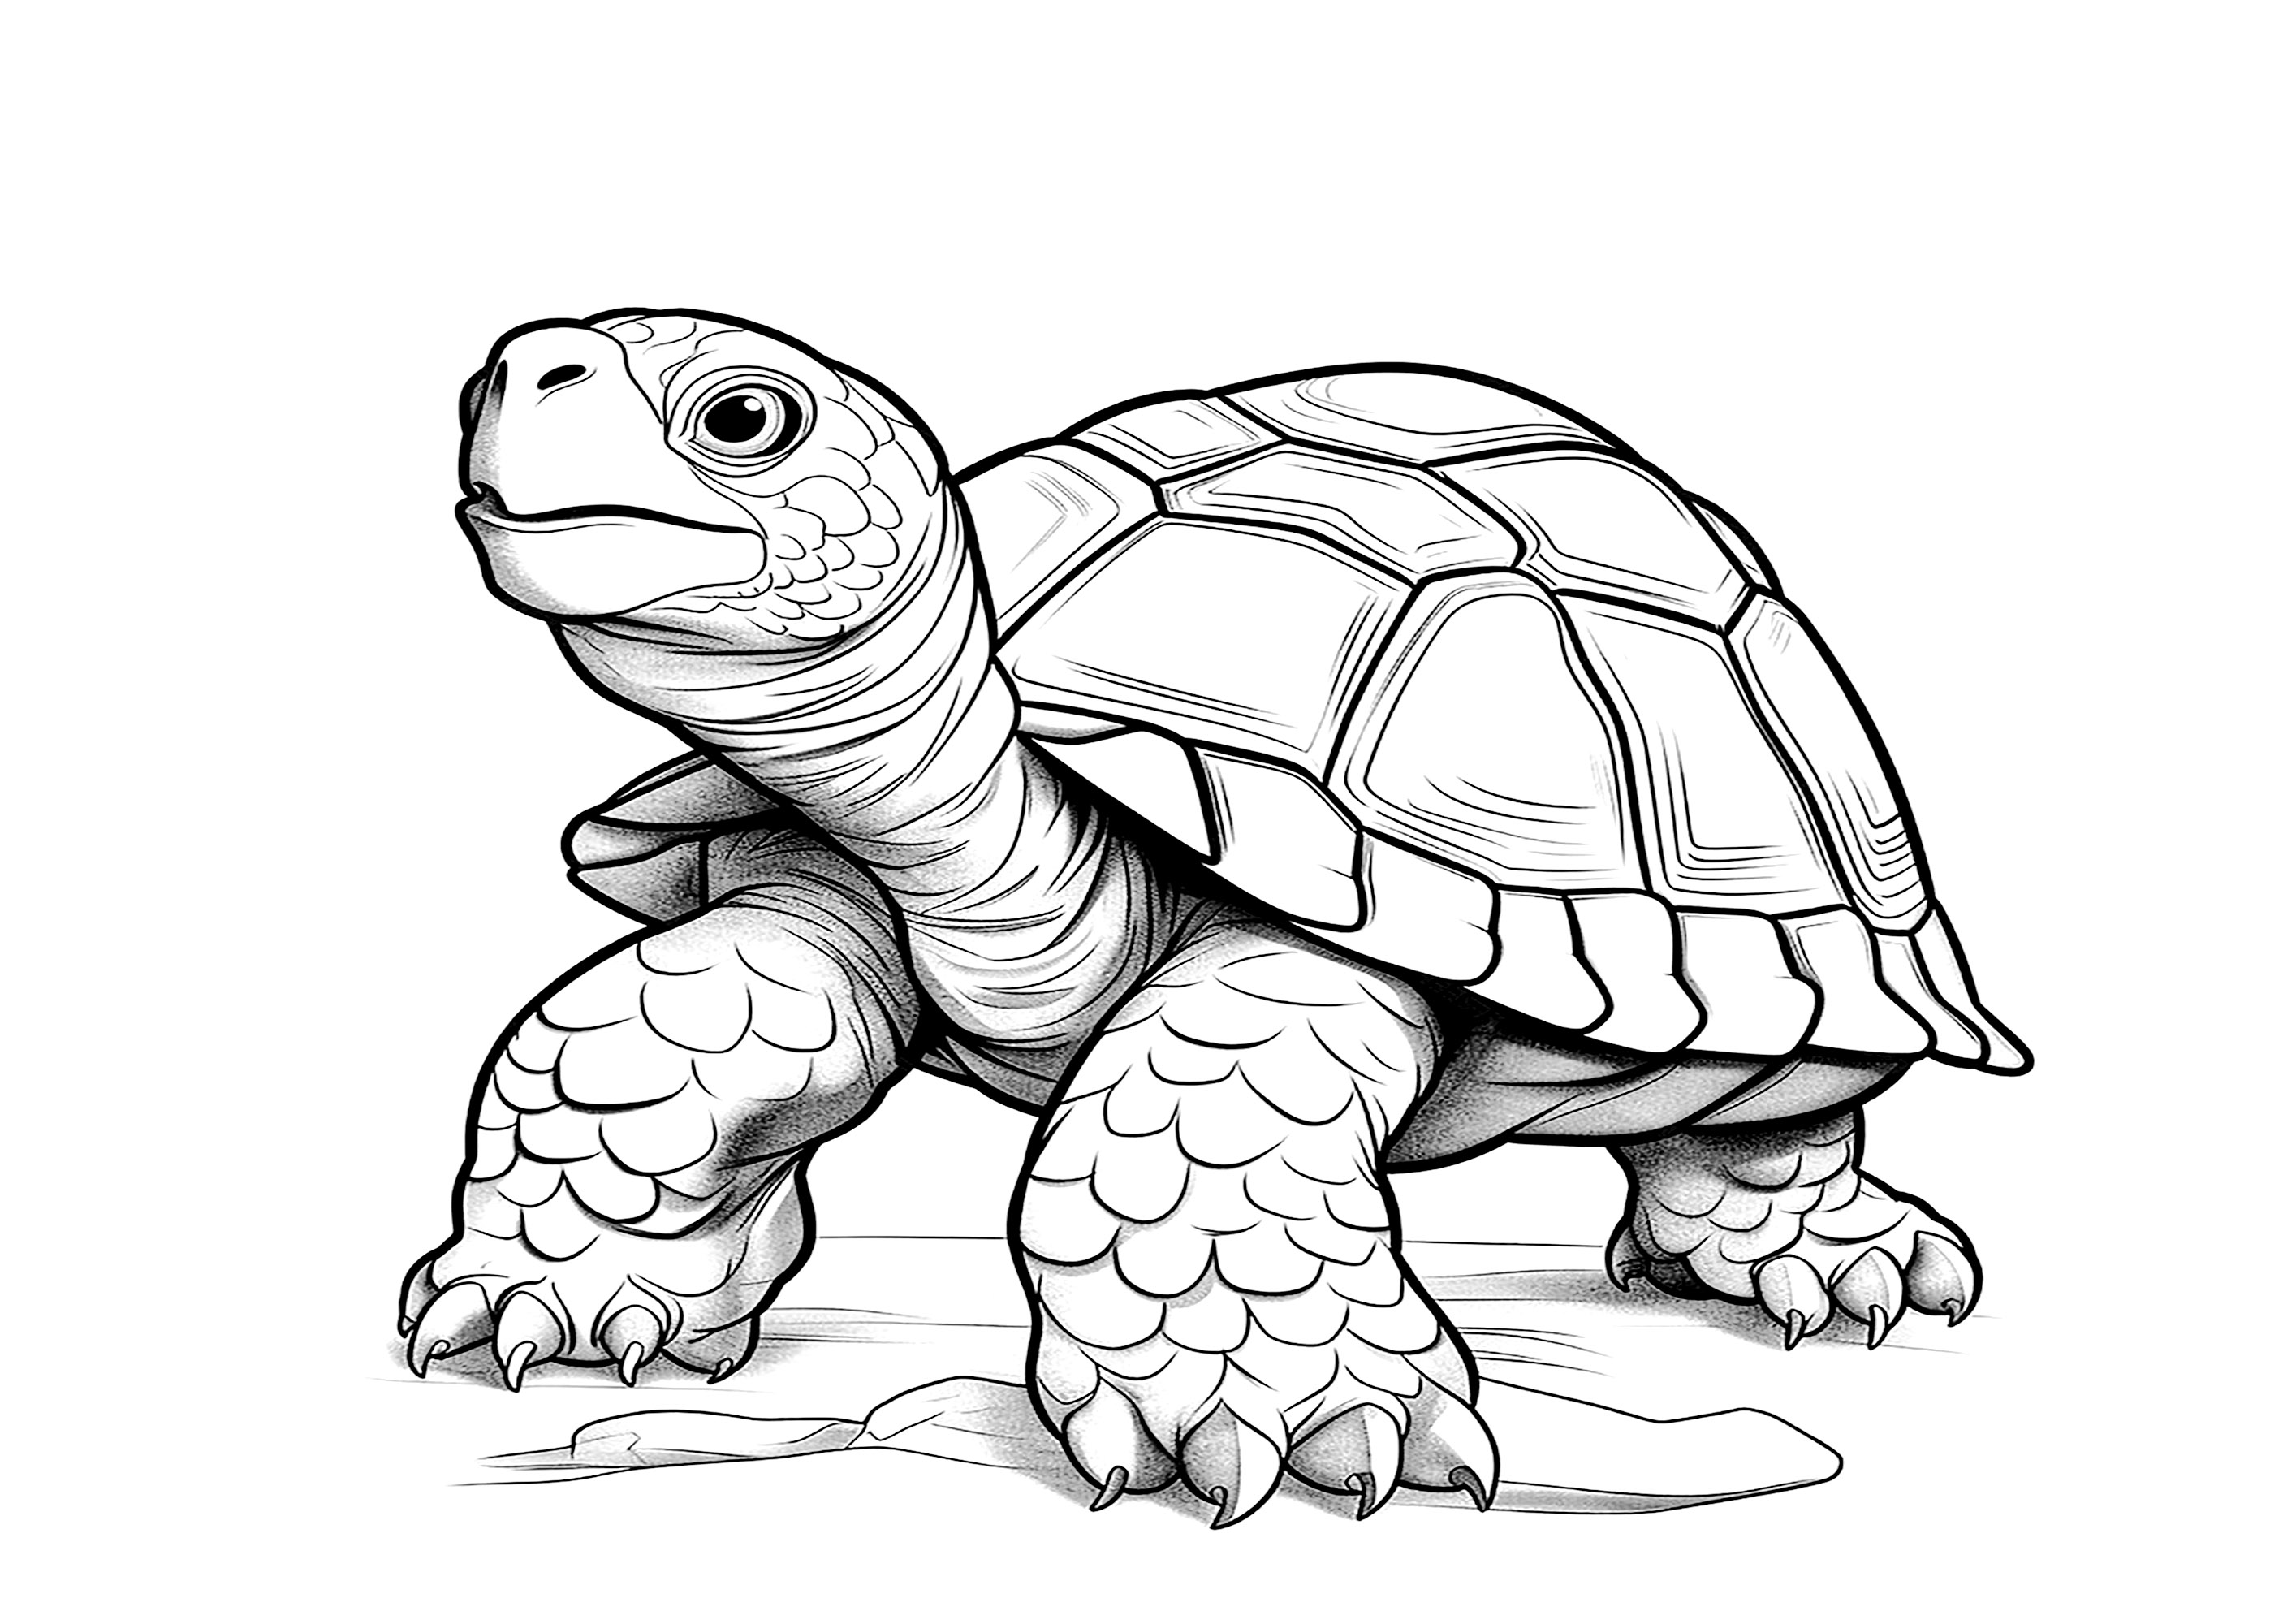 How to draw a GIANT TORTOISE - YouTube